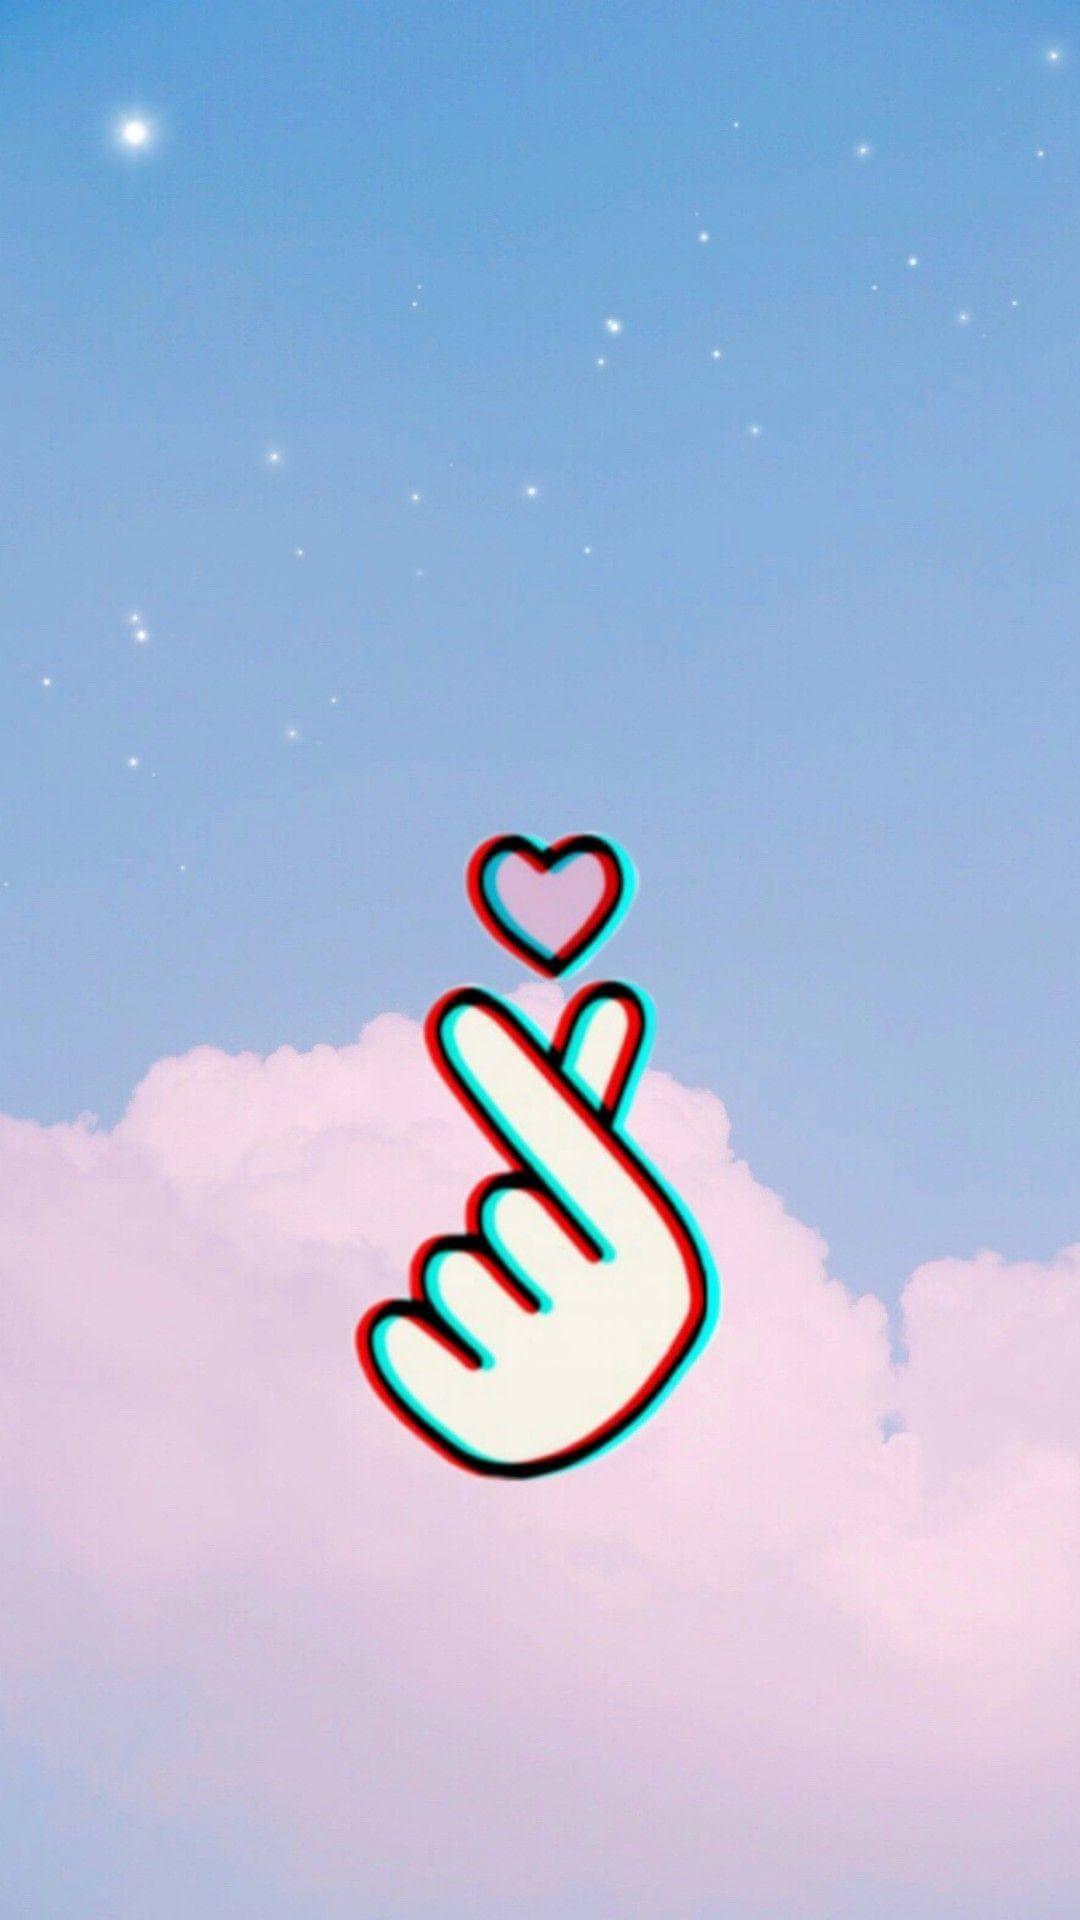 1080x1920 / 1080x1920 computer, love, heart, minimalism for Iphone 6, 7, 8  wallpaper - Coolwallpapers.me!